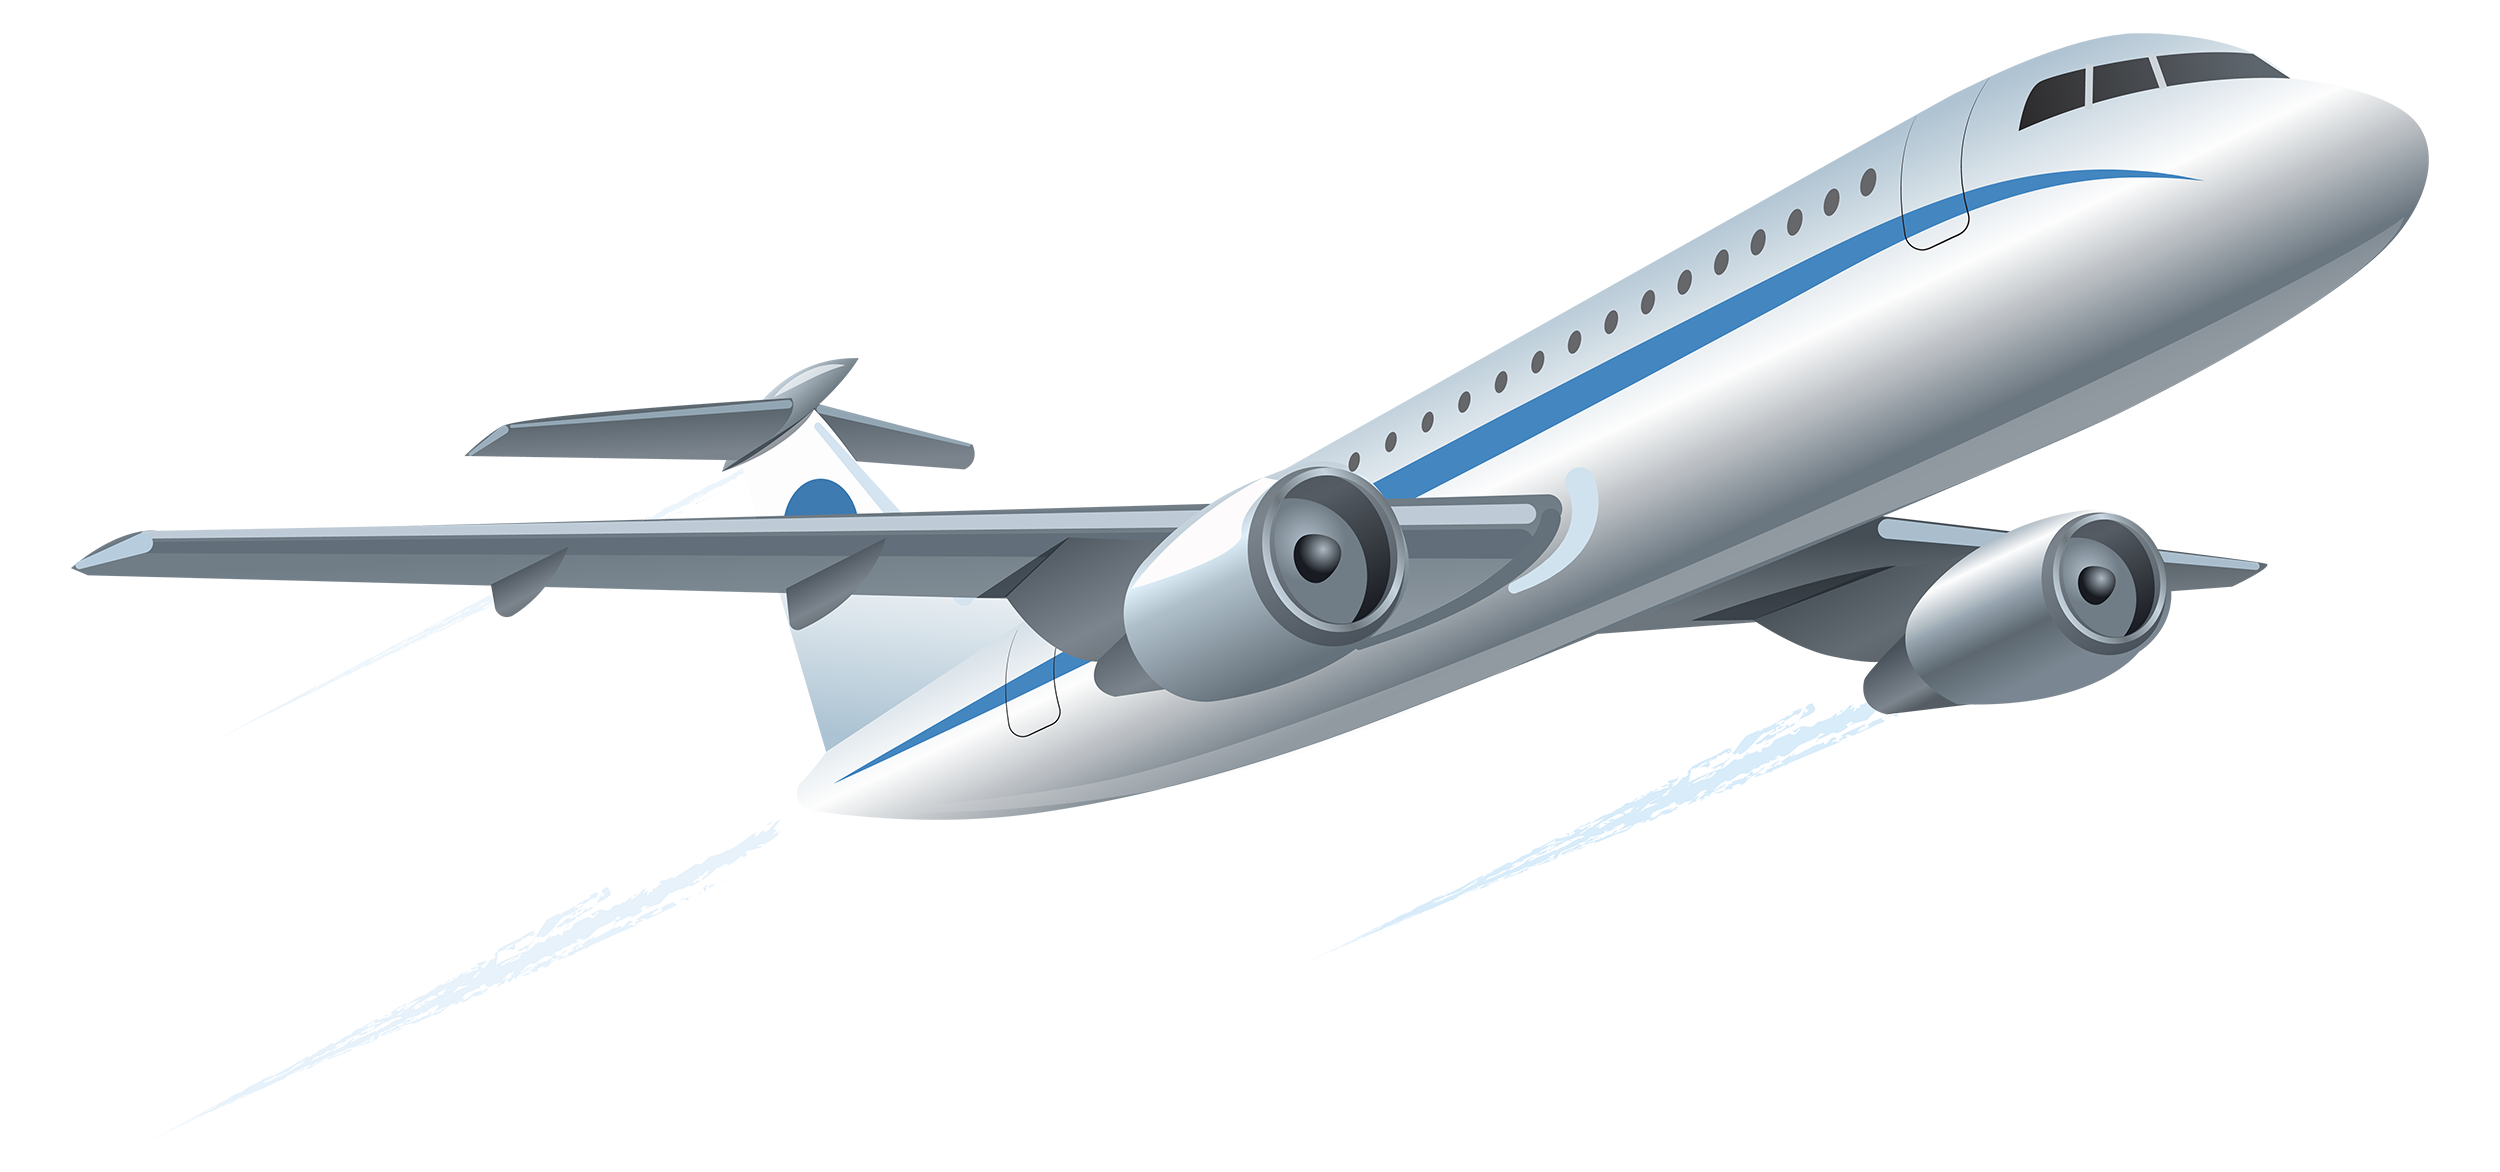 Young clipart toy plane. Image result for airplane